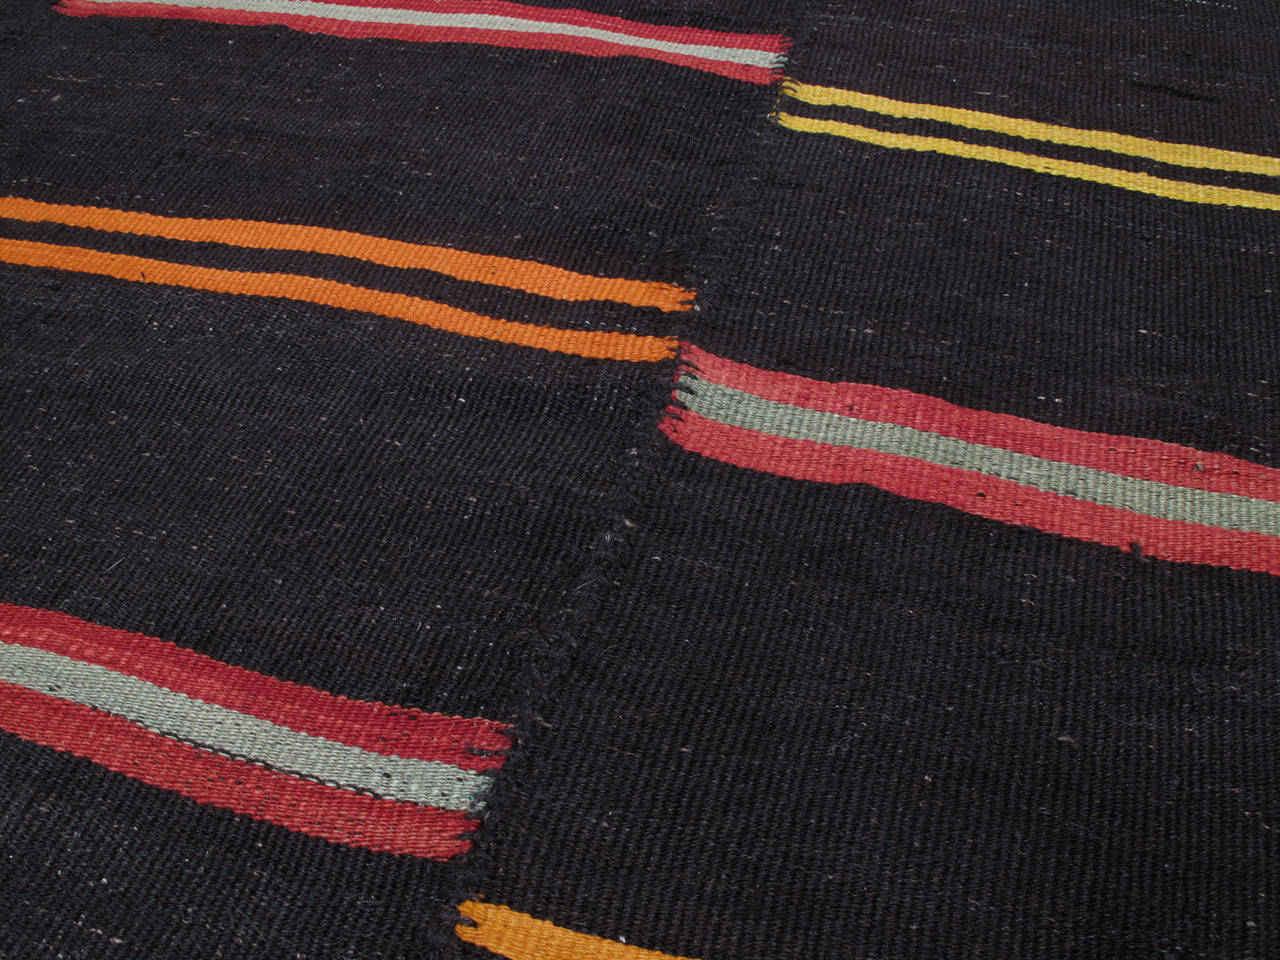 Hand-Woven Large Kilim Rug with Bright Stripes